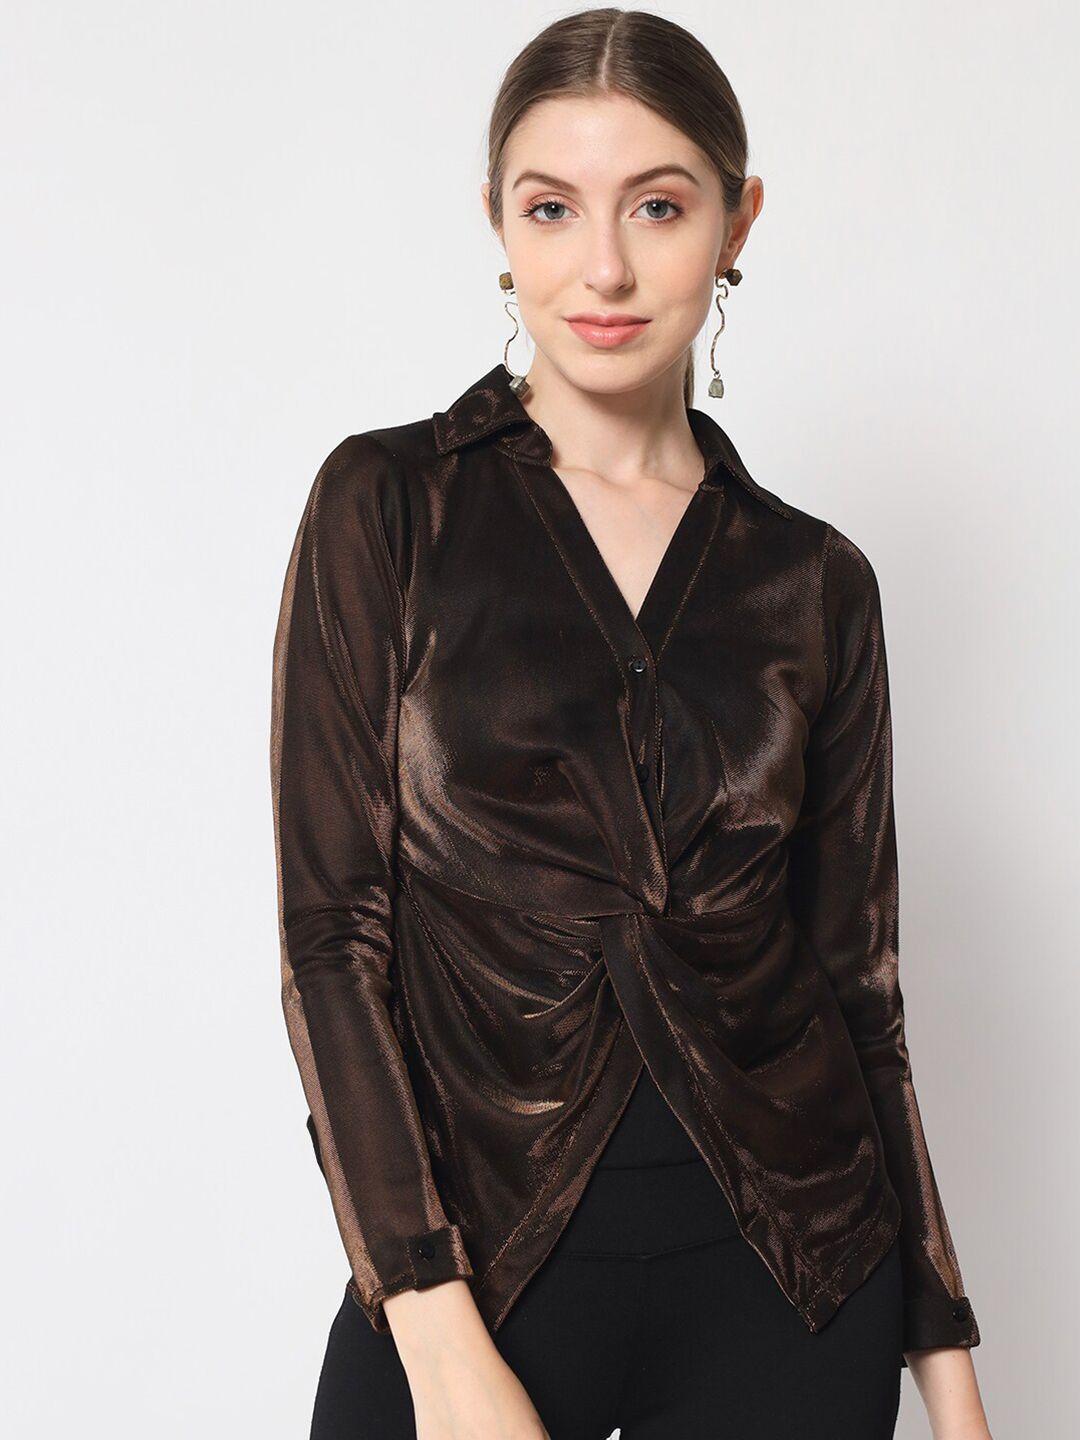 chemistry shimmer twisted shirt style top